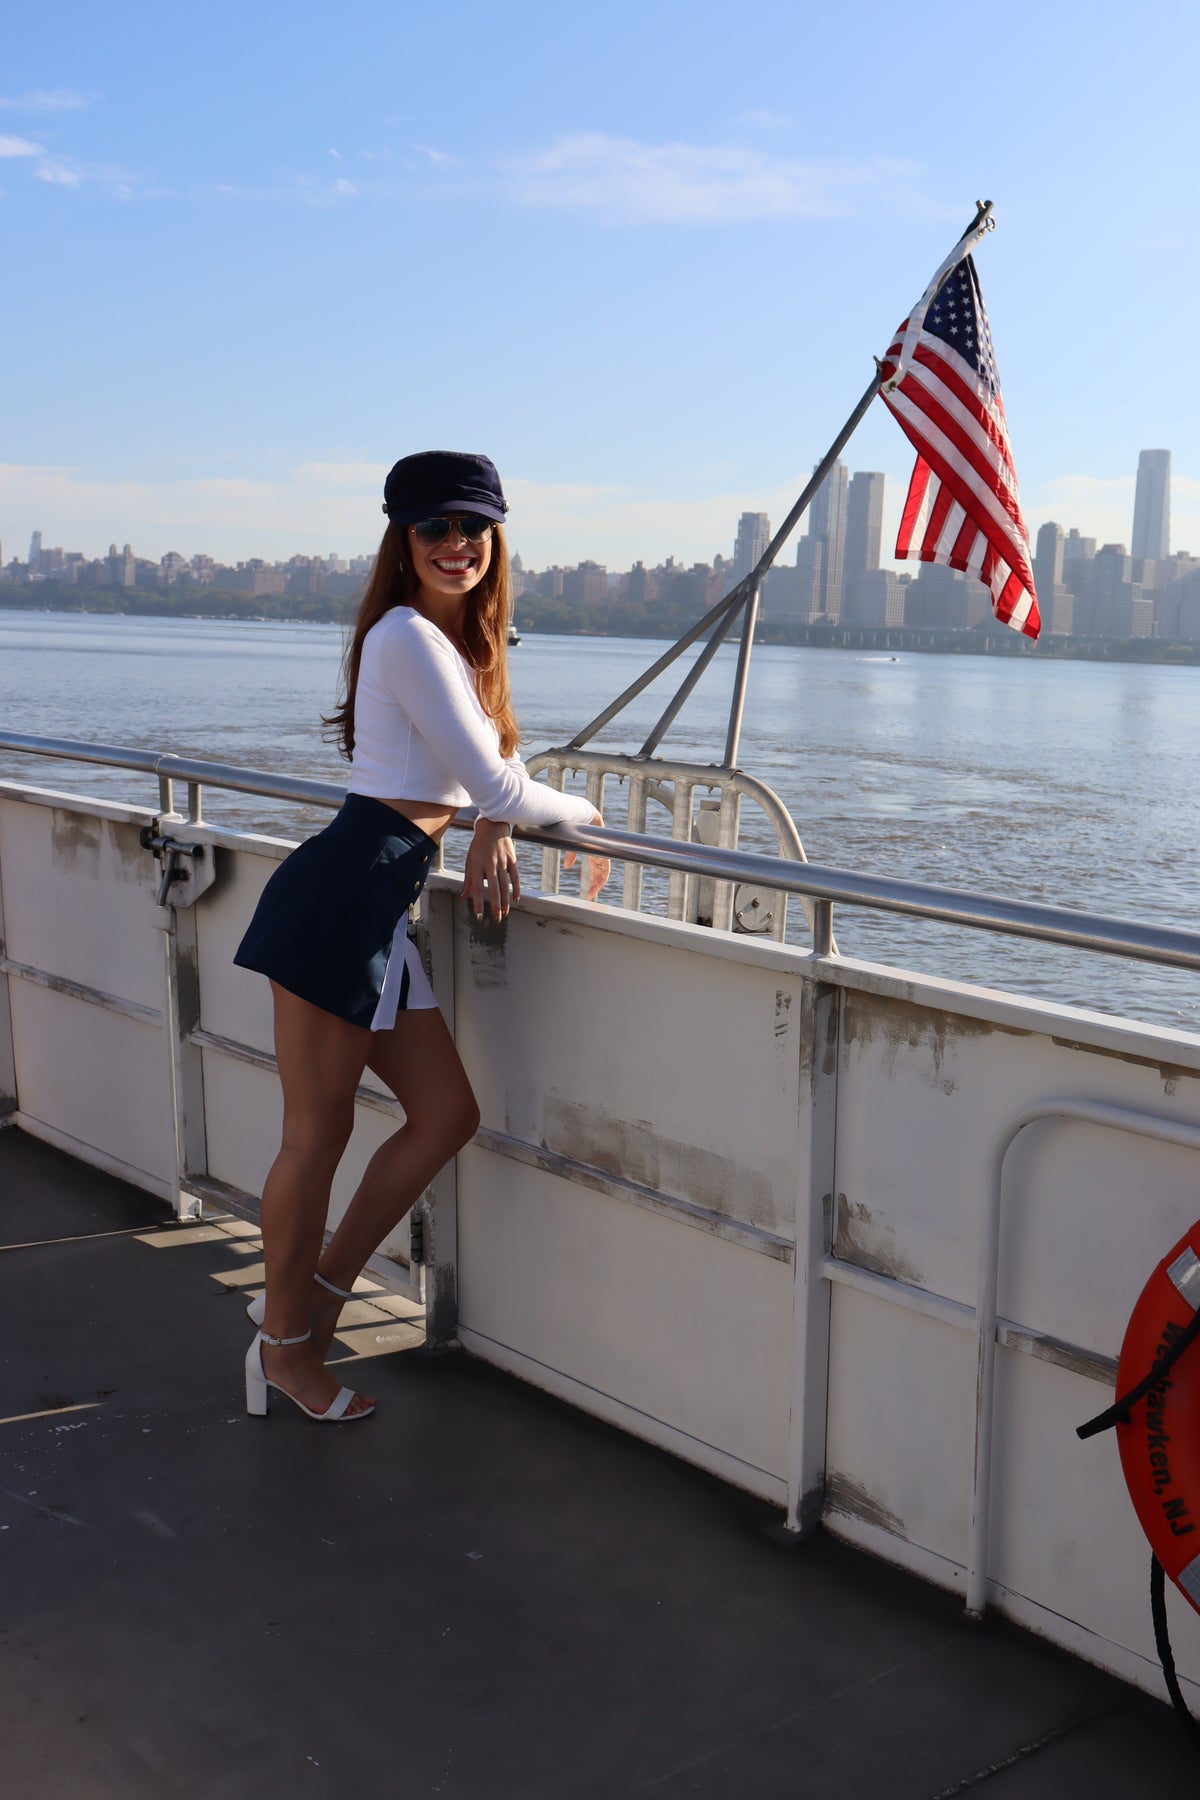 Model wearing scoop neck long sleeve white crop top and blue and white spinnaker shorts leaning against a railing in front of the American flag in front of water.